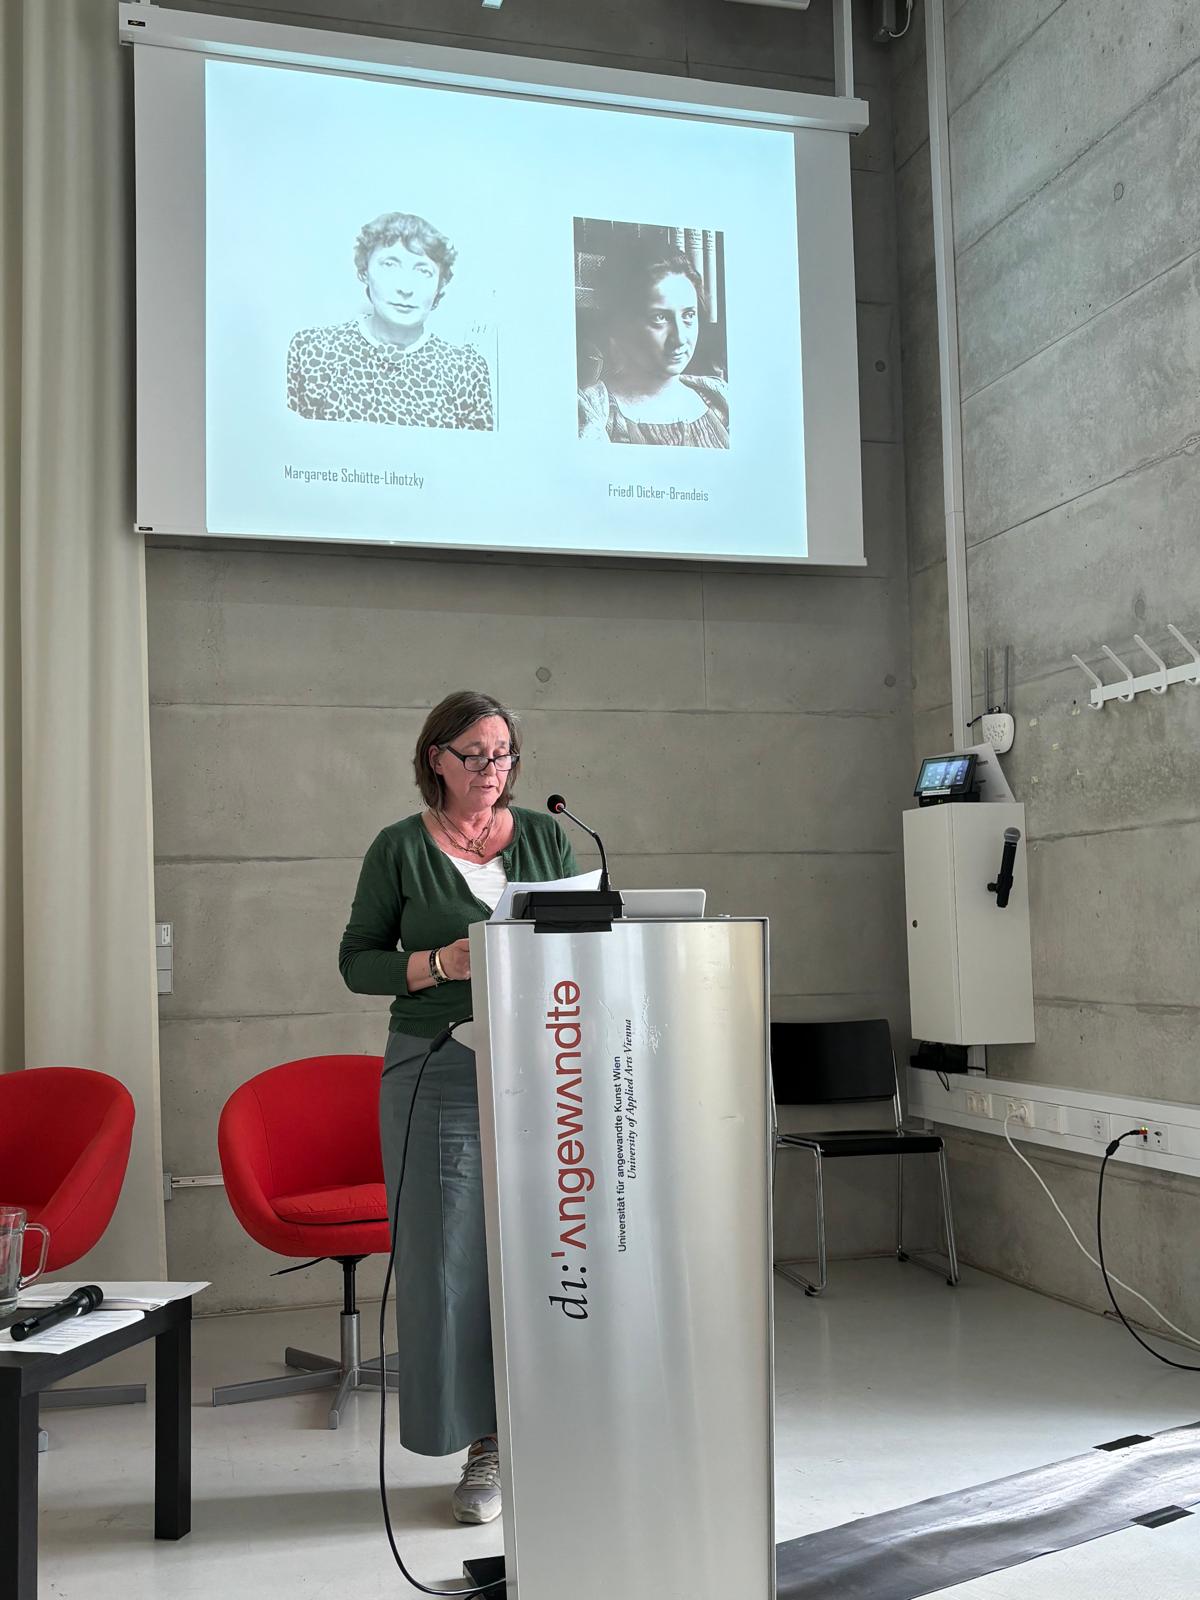 Christine Oertel from the MSL Centre during her lecture ”Successful - forgotten - rediscovered? Women architects before and after the war”